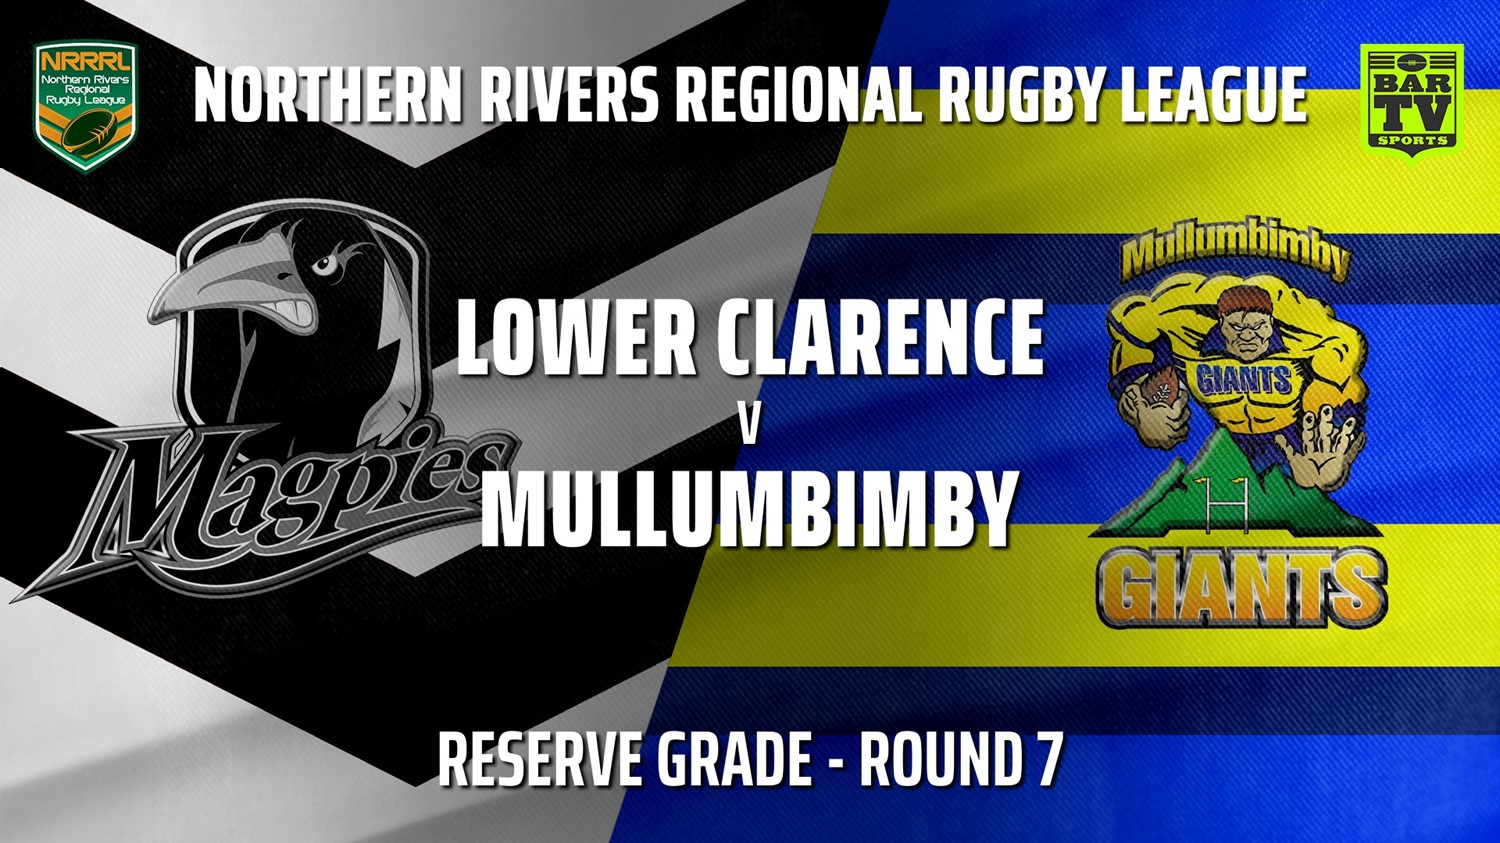 210620-Northern Rivers Round 7 - Reserve Grade - Lower Clarence Magpies v Mullumbimby Giants Slate Image